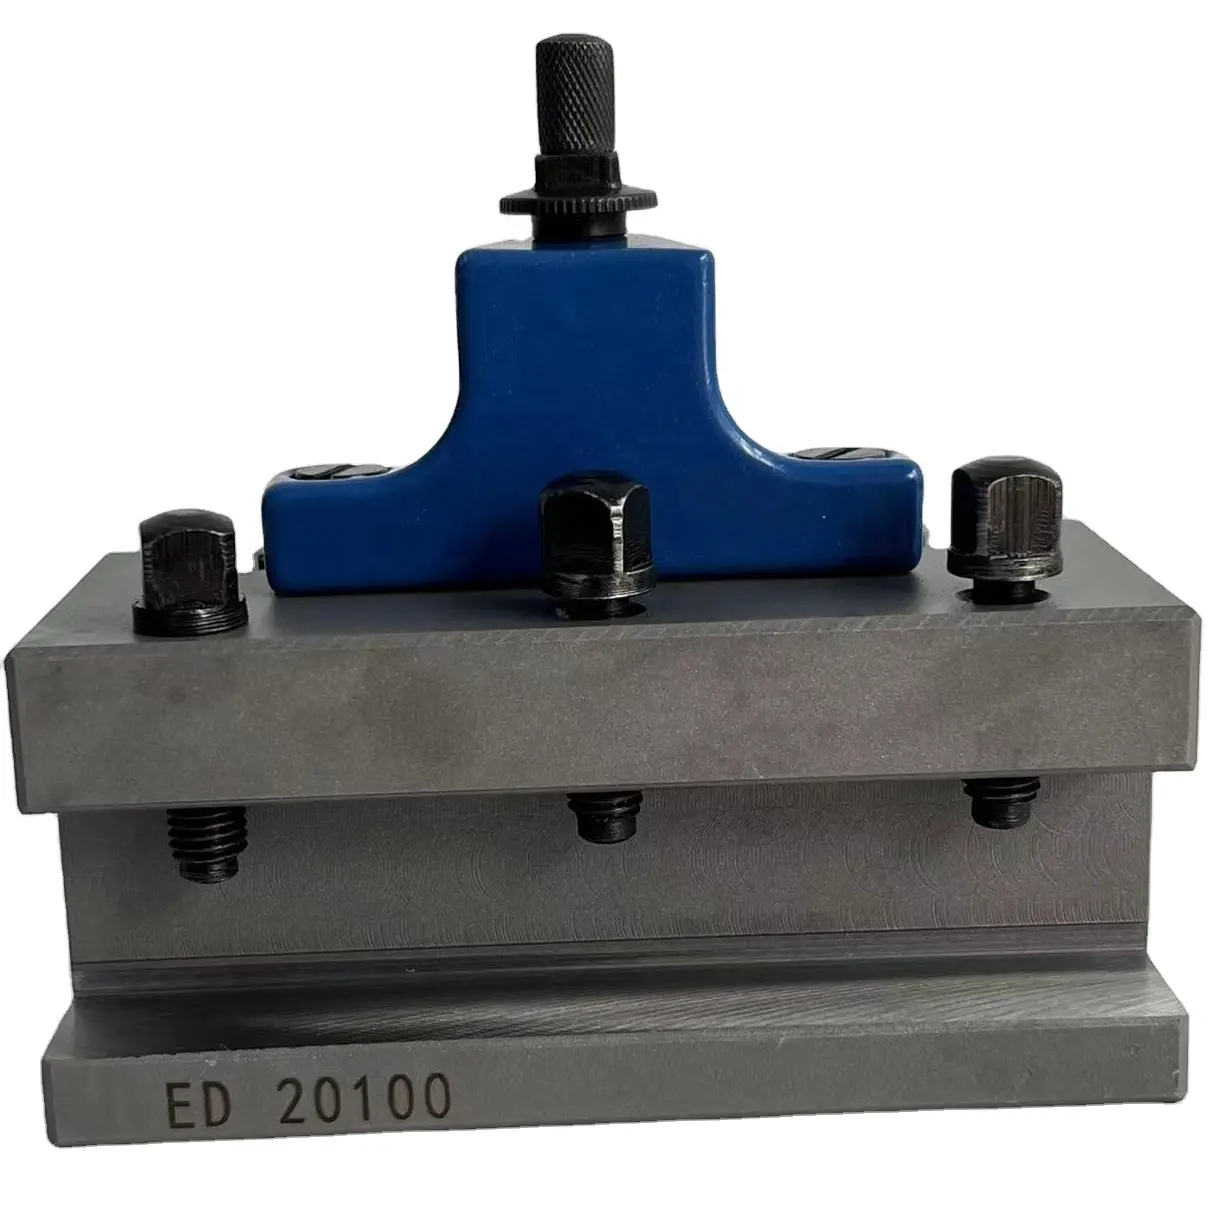 turning and facing holder for 40 position Multifix quick change tool post